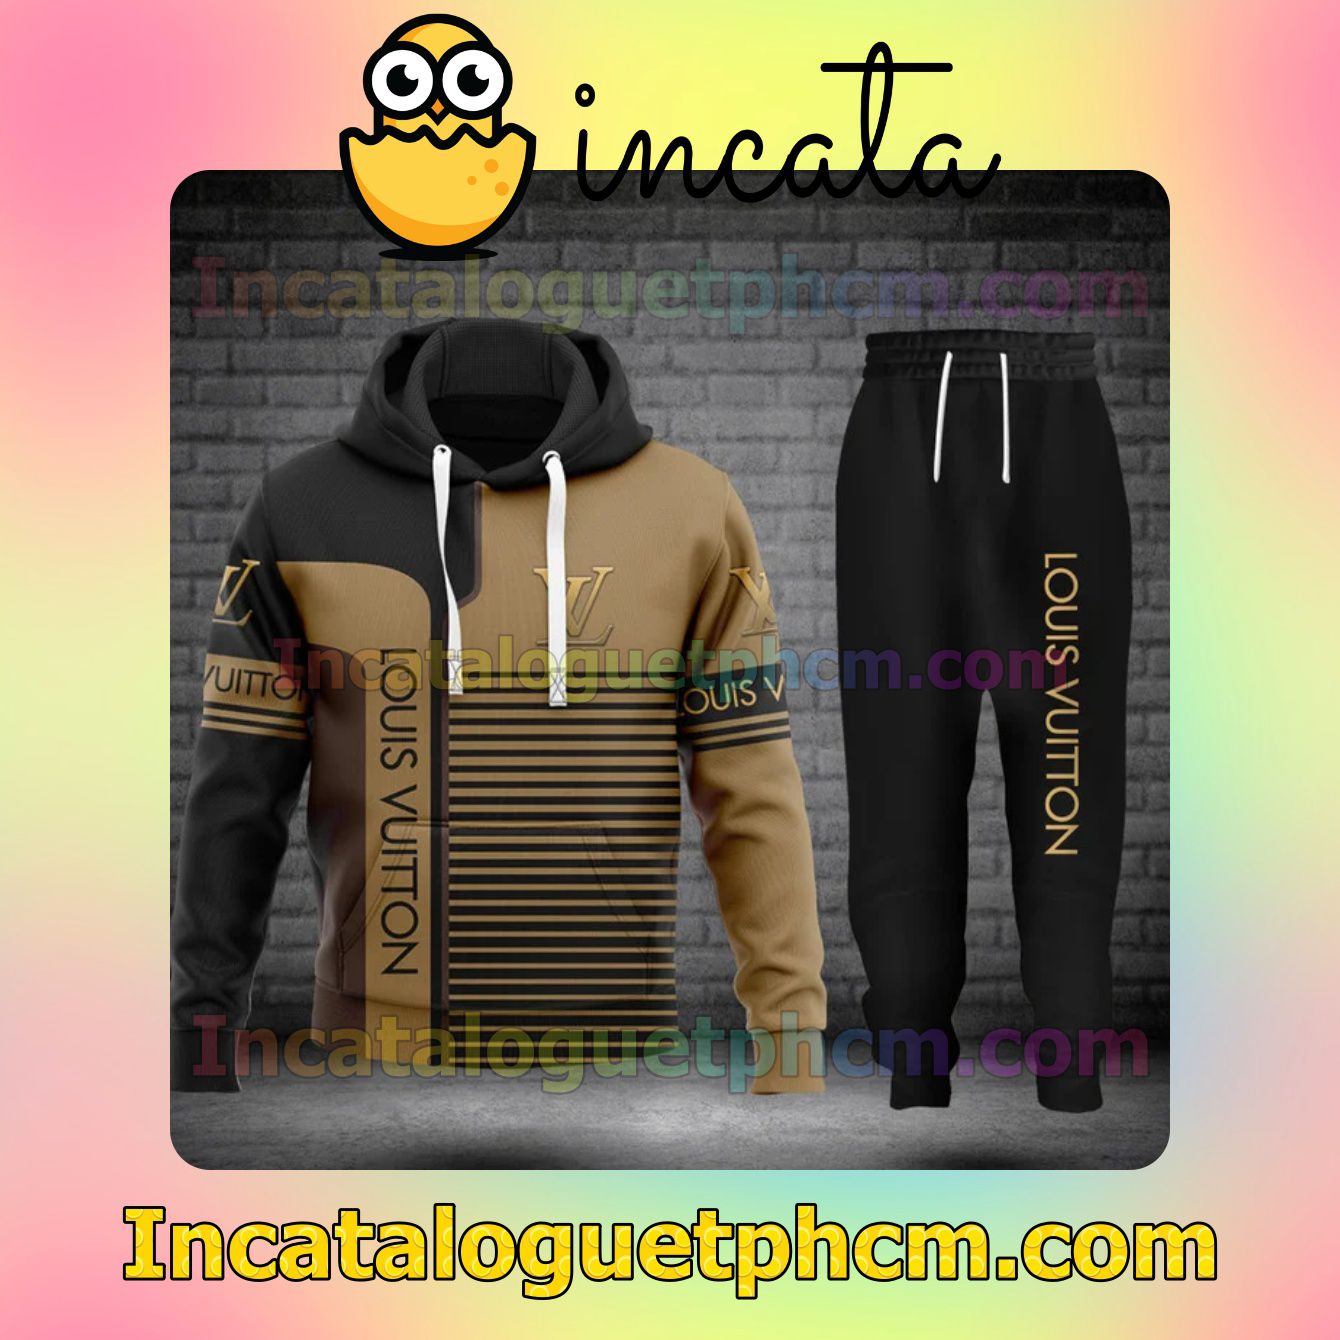 Near me Louis Vuitton Stripes Mix Brown And Black Zipper Hooded Sweatshirt And Pants